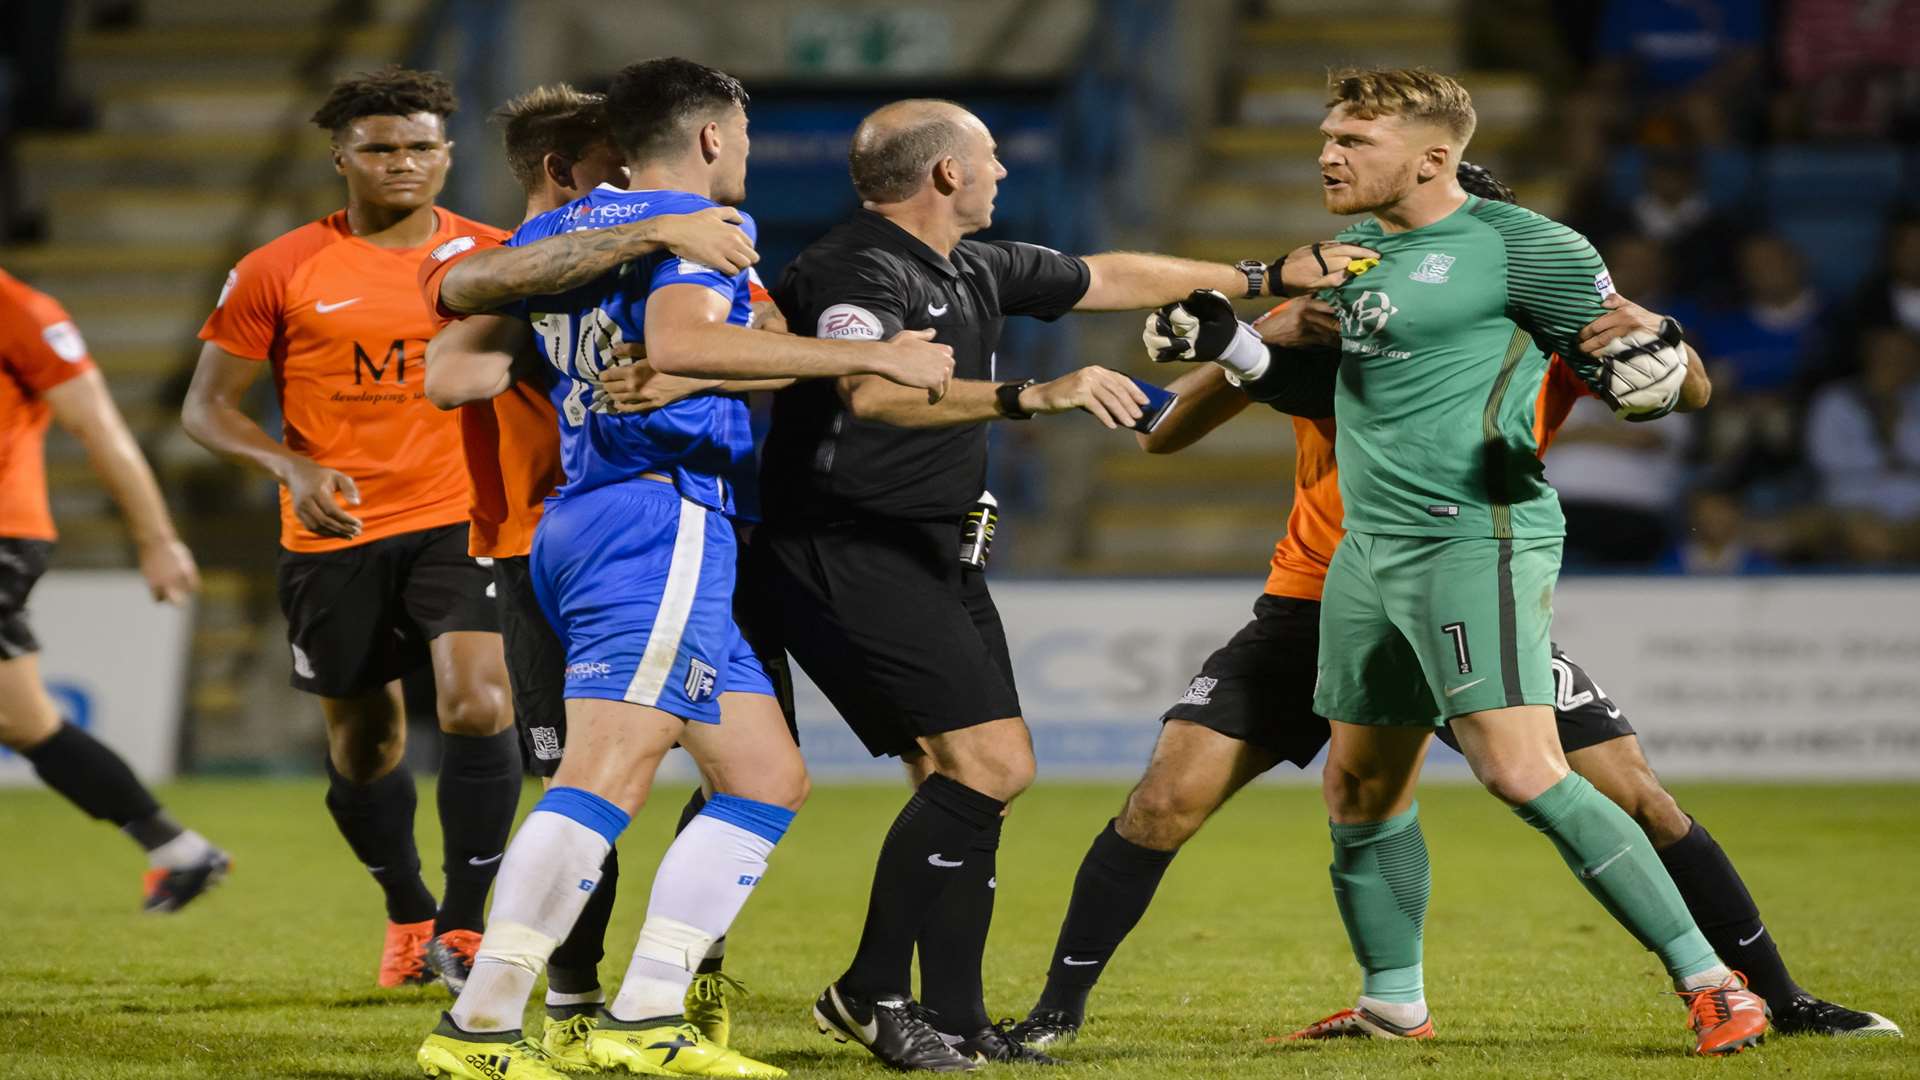 Conor Wilkinson got a yellow card for a late challenge on the Southend keeper Picture: Andy Payton